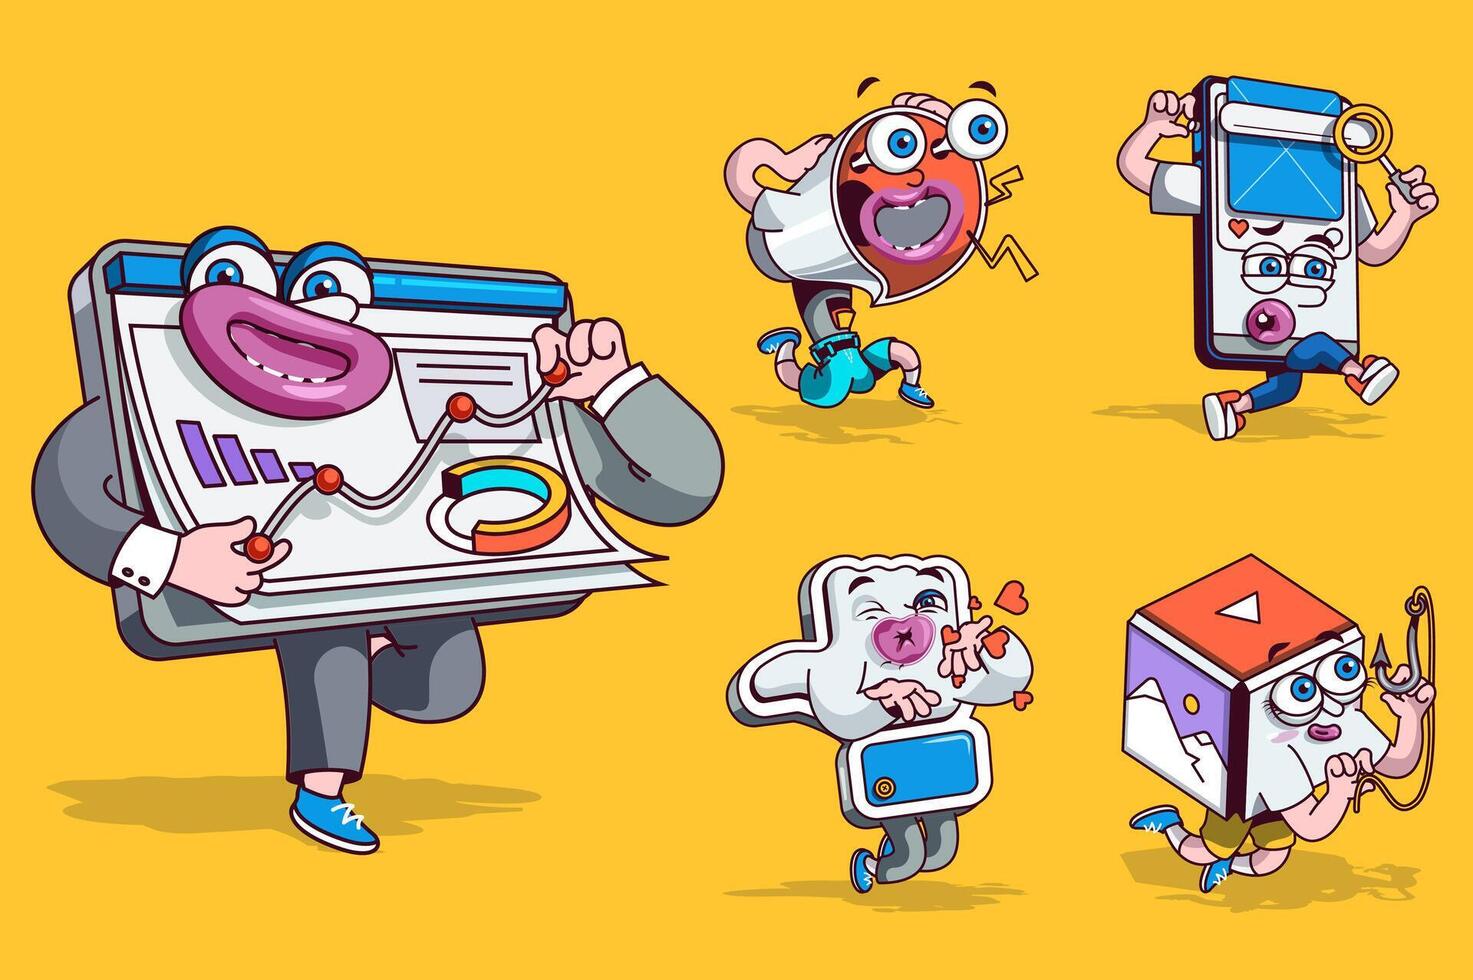 Marketing concept with 3d cute cartoon characters set. Funny avatars of data analysis report, megaphone, networking smartphone, like and promo content. Vector illustration with comic mascots design